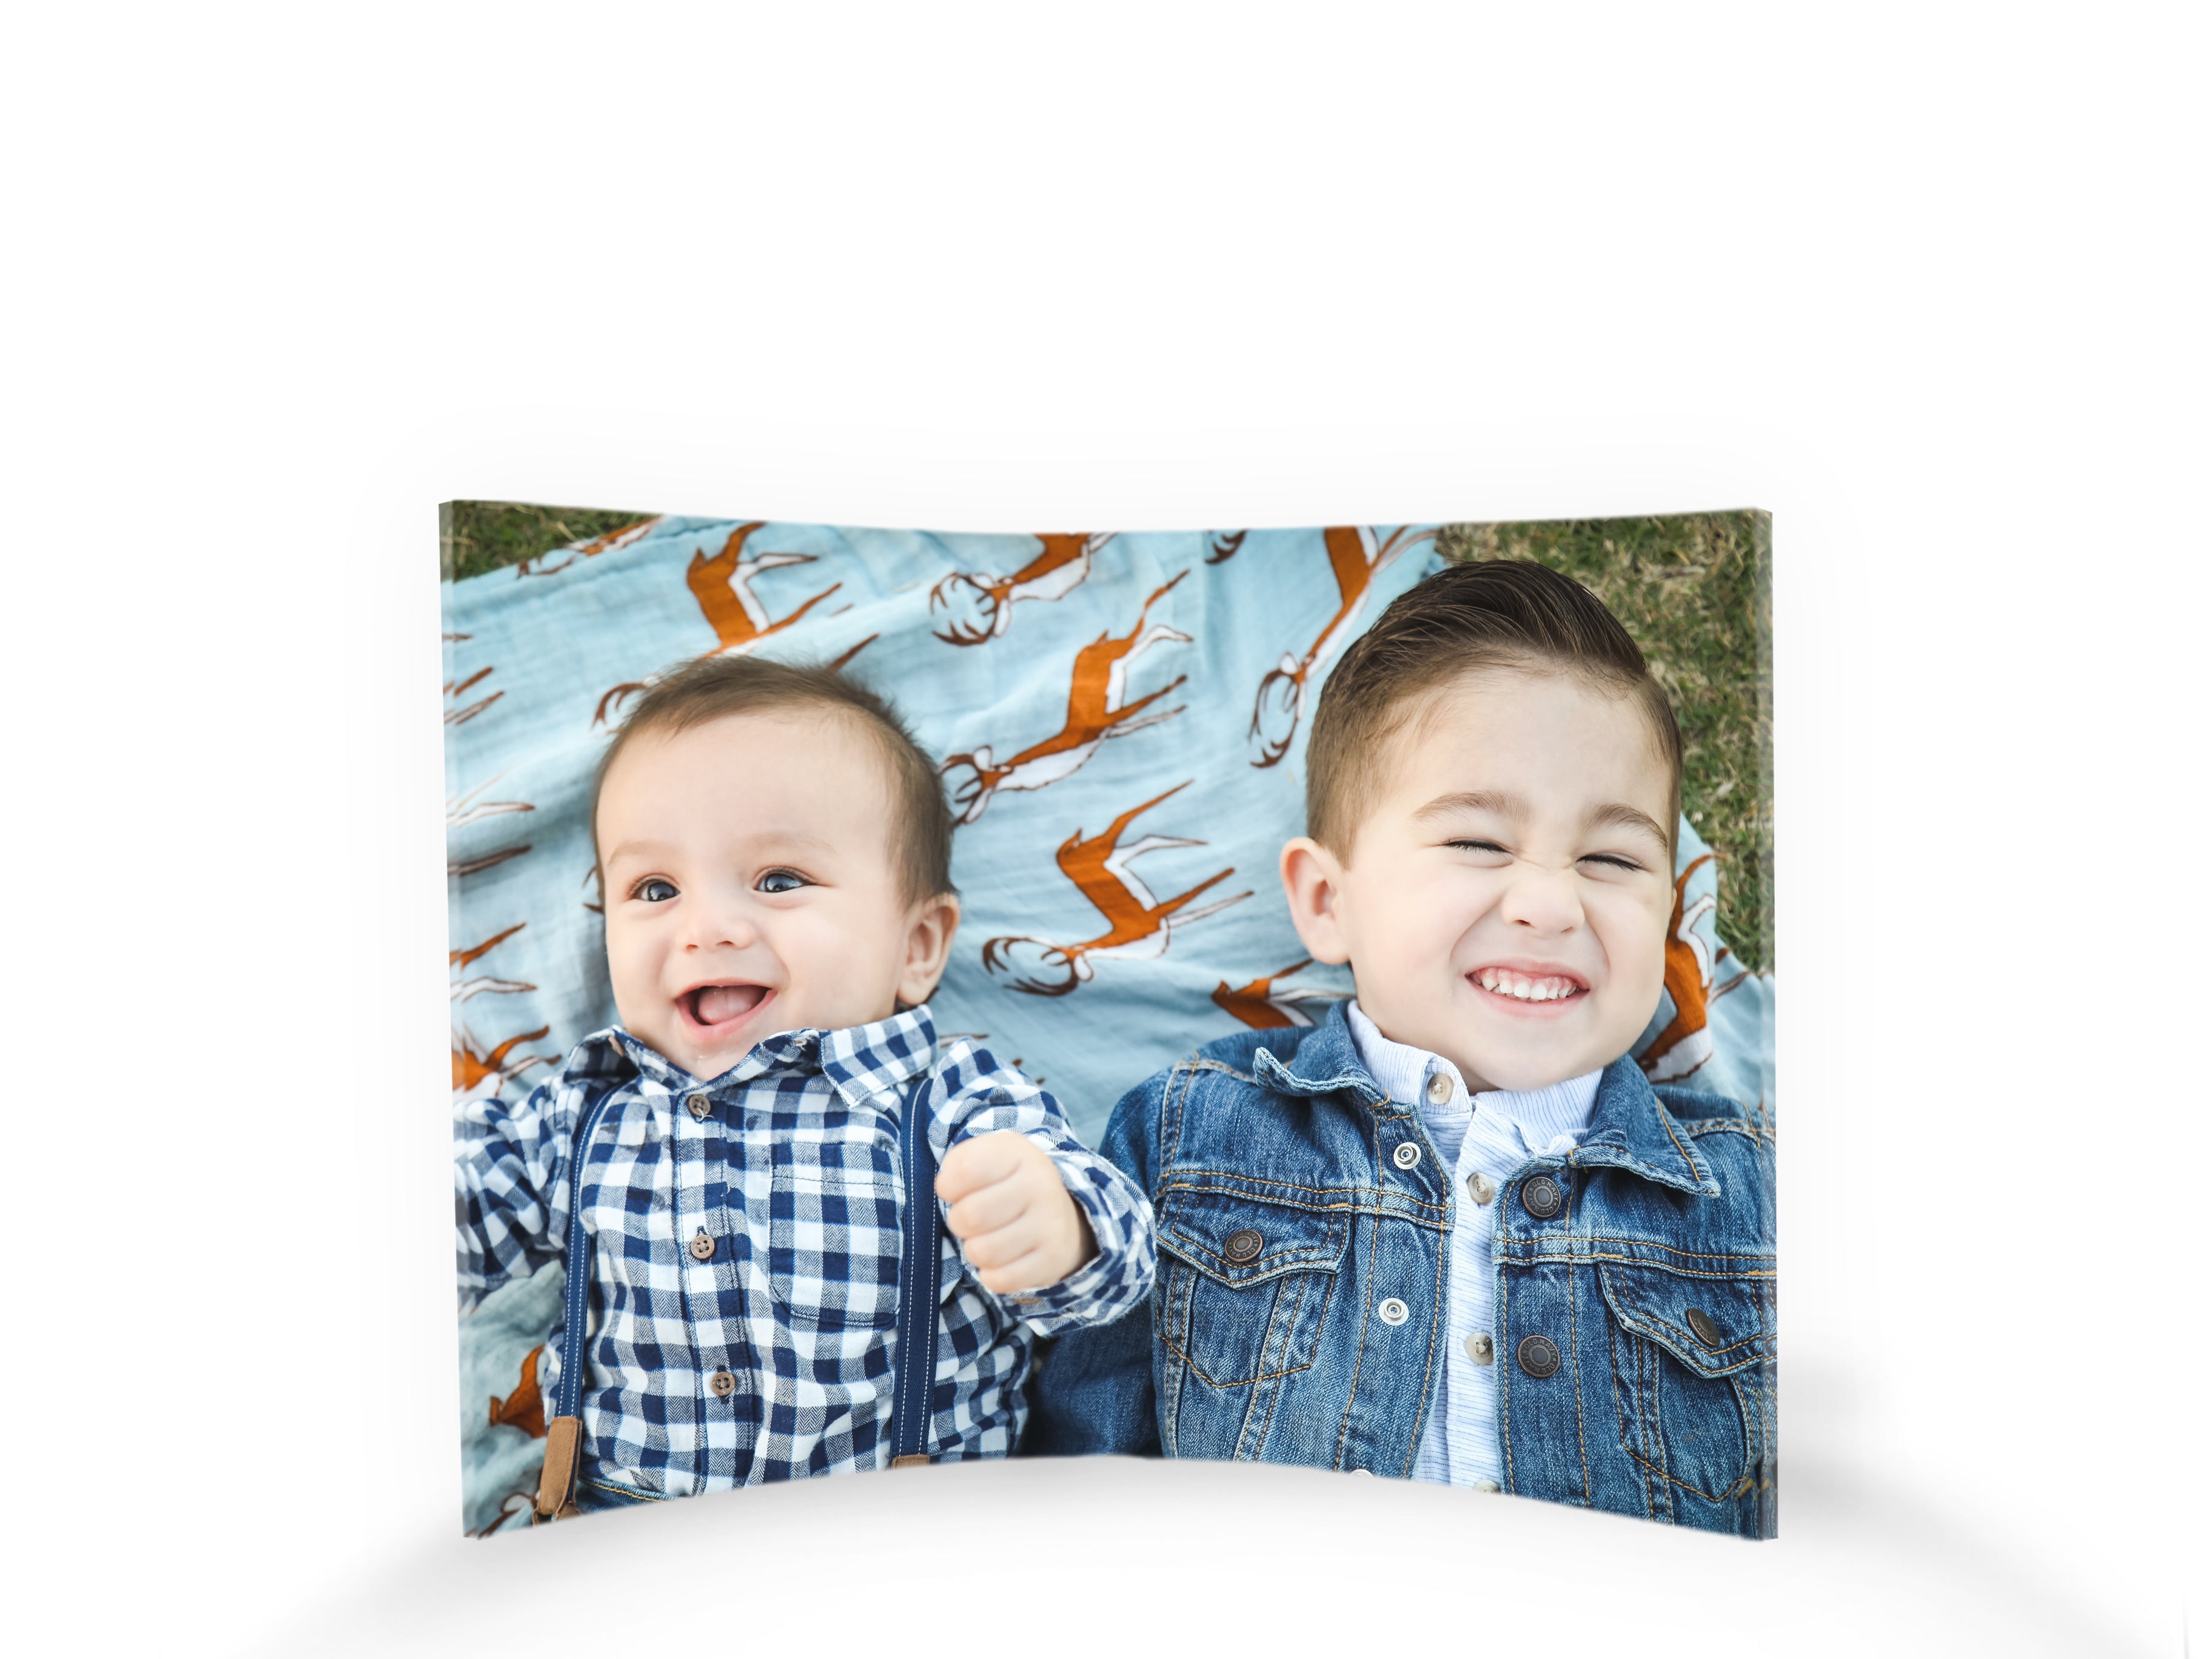 7" x 5" Curved Acrylic Print - Upload your photo!